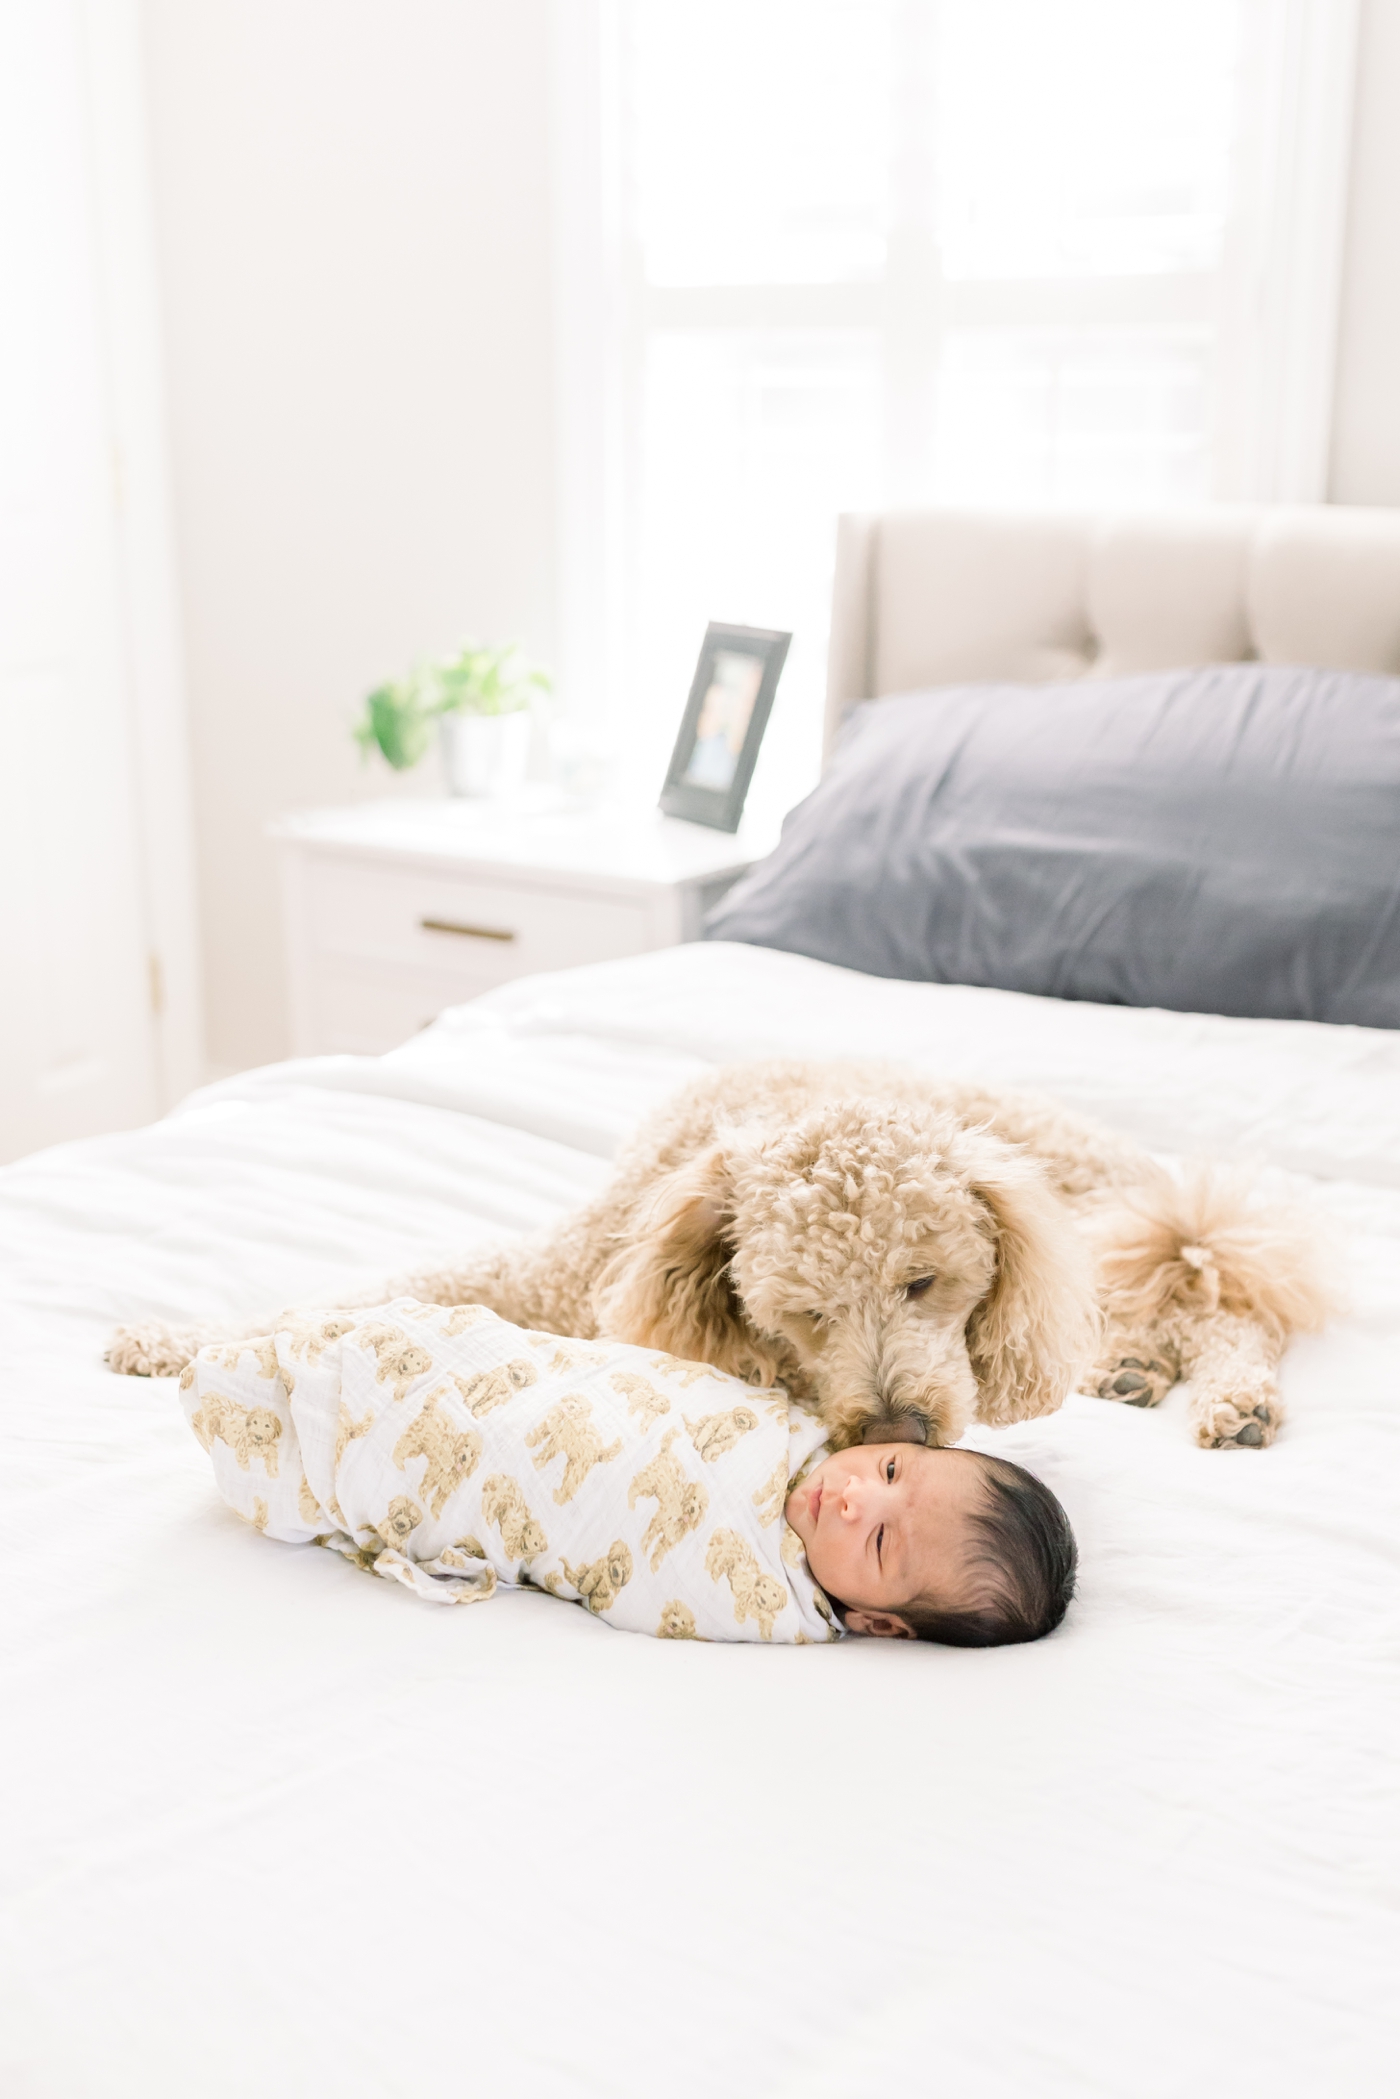 Baby on bed with family dog during newborn session with Caitlyn Motycka Photography.